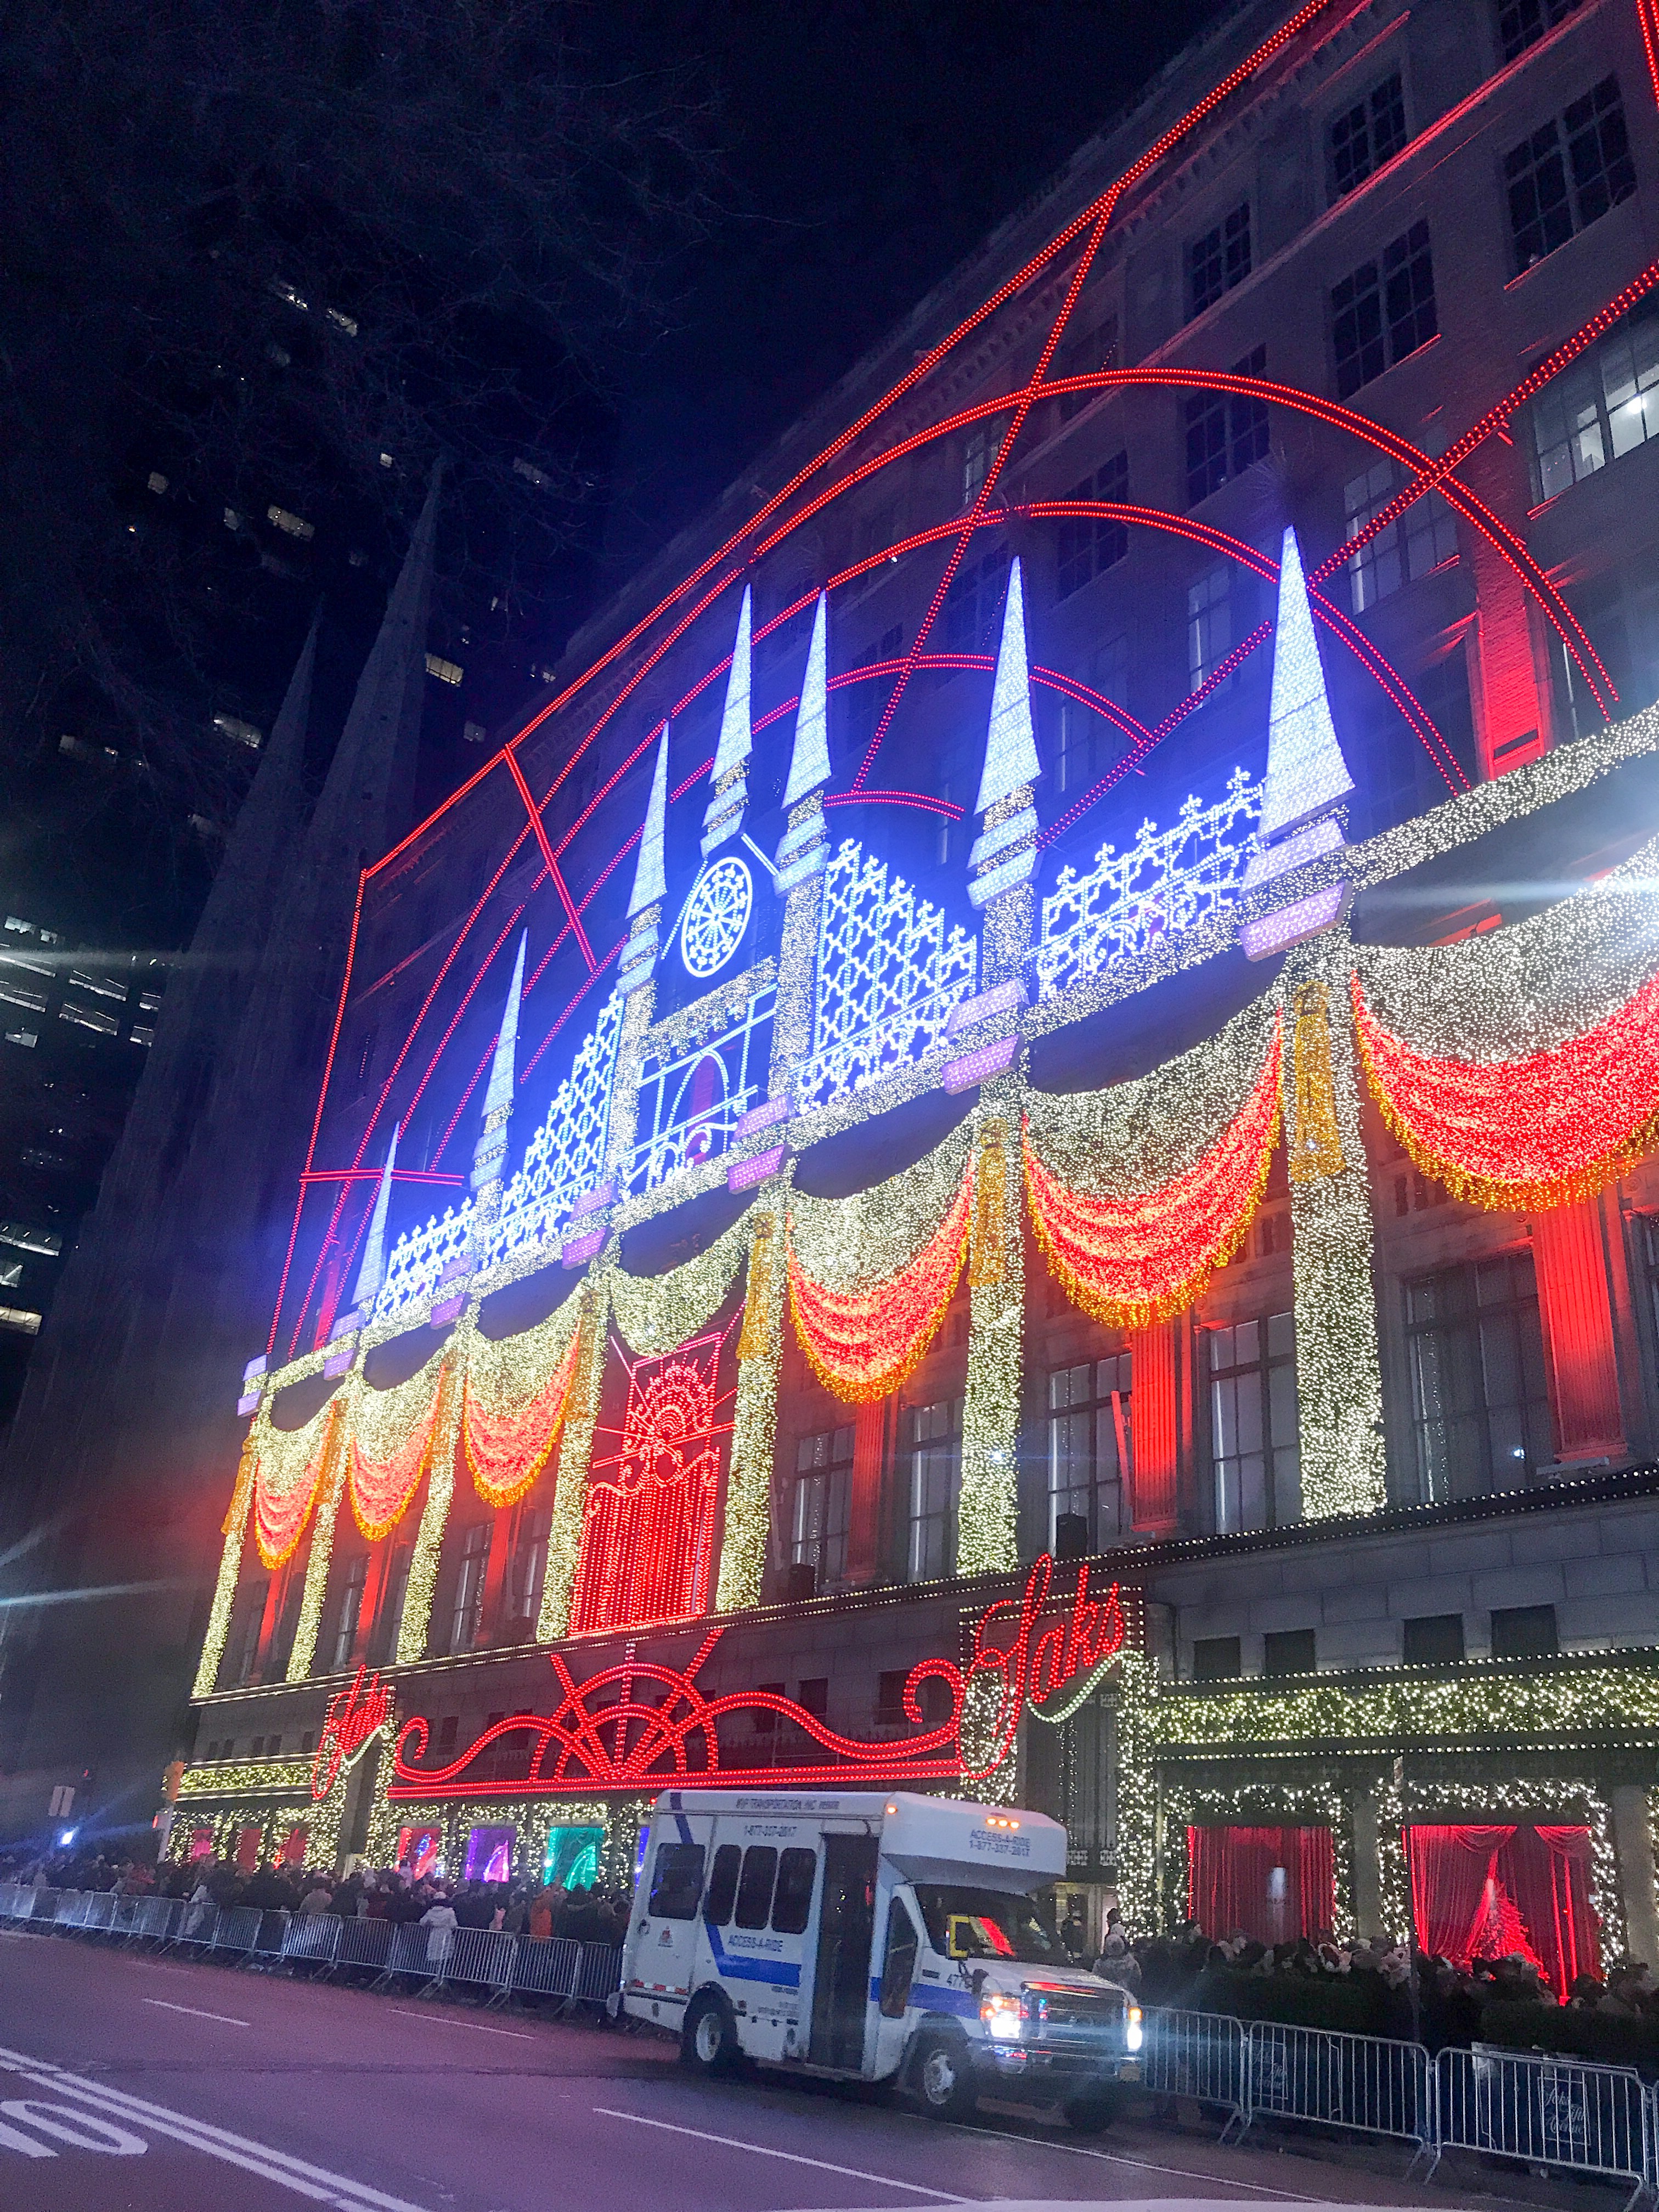 The Saks light show in NYC